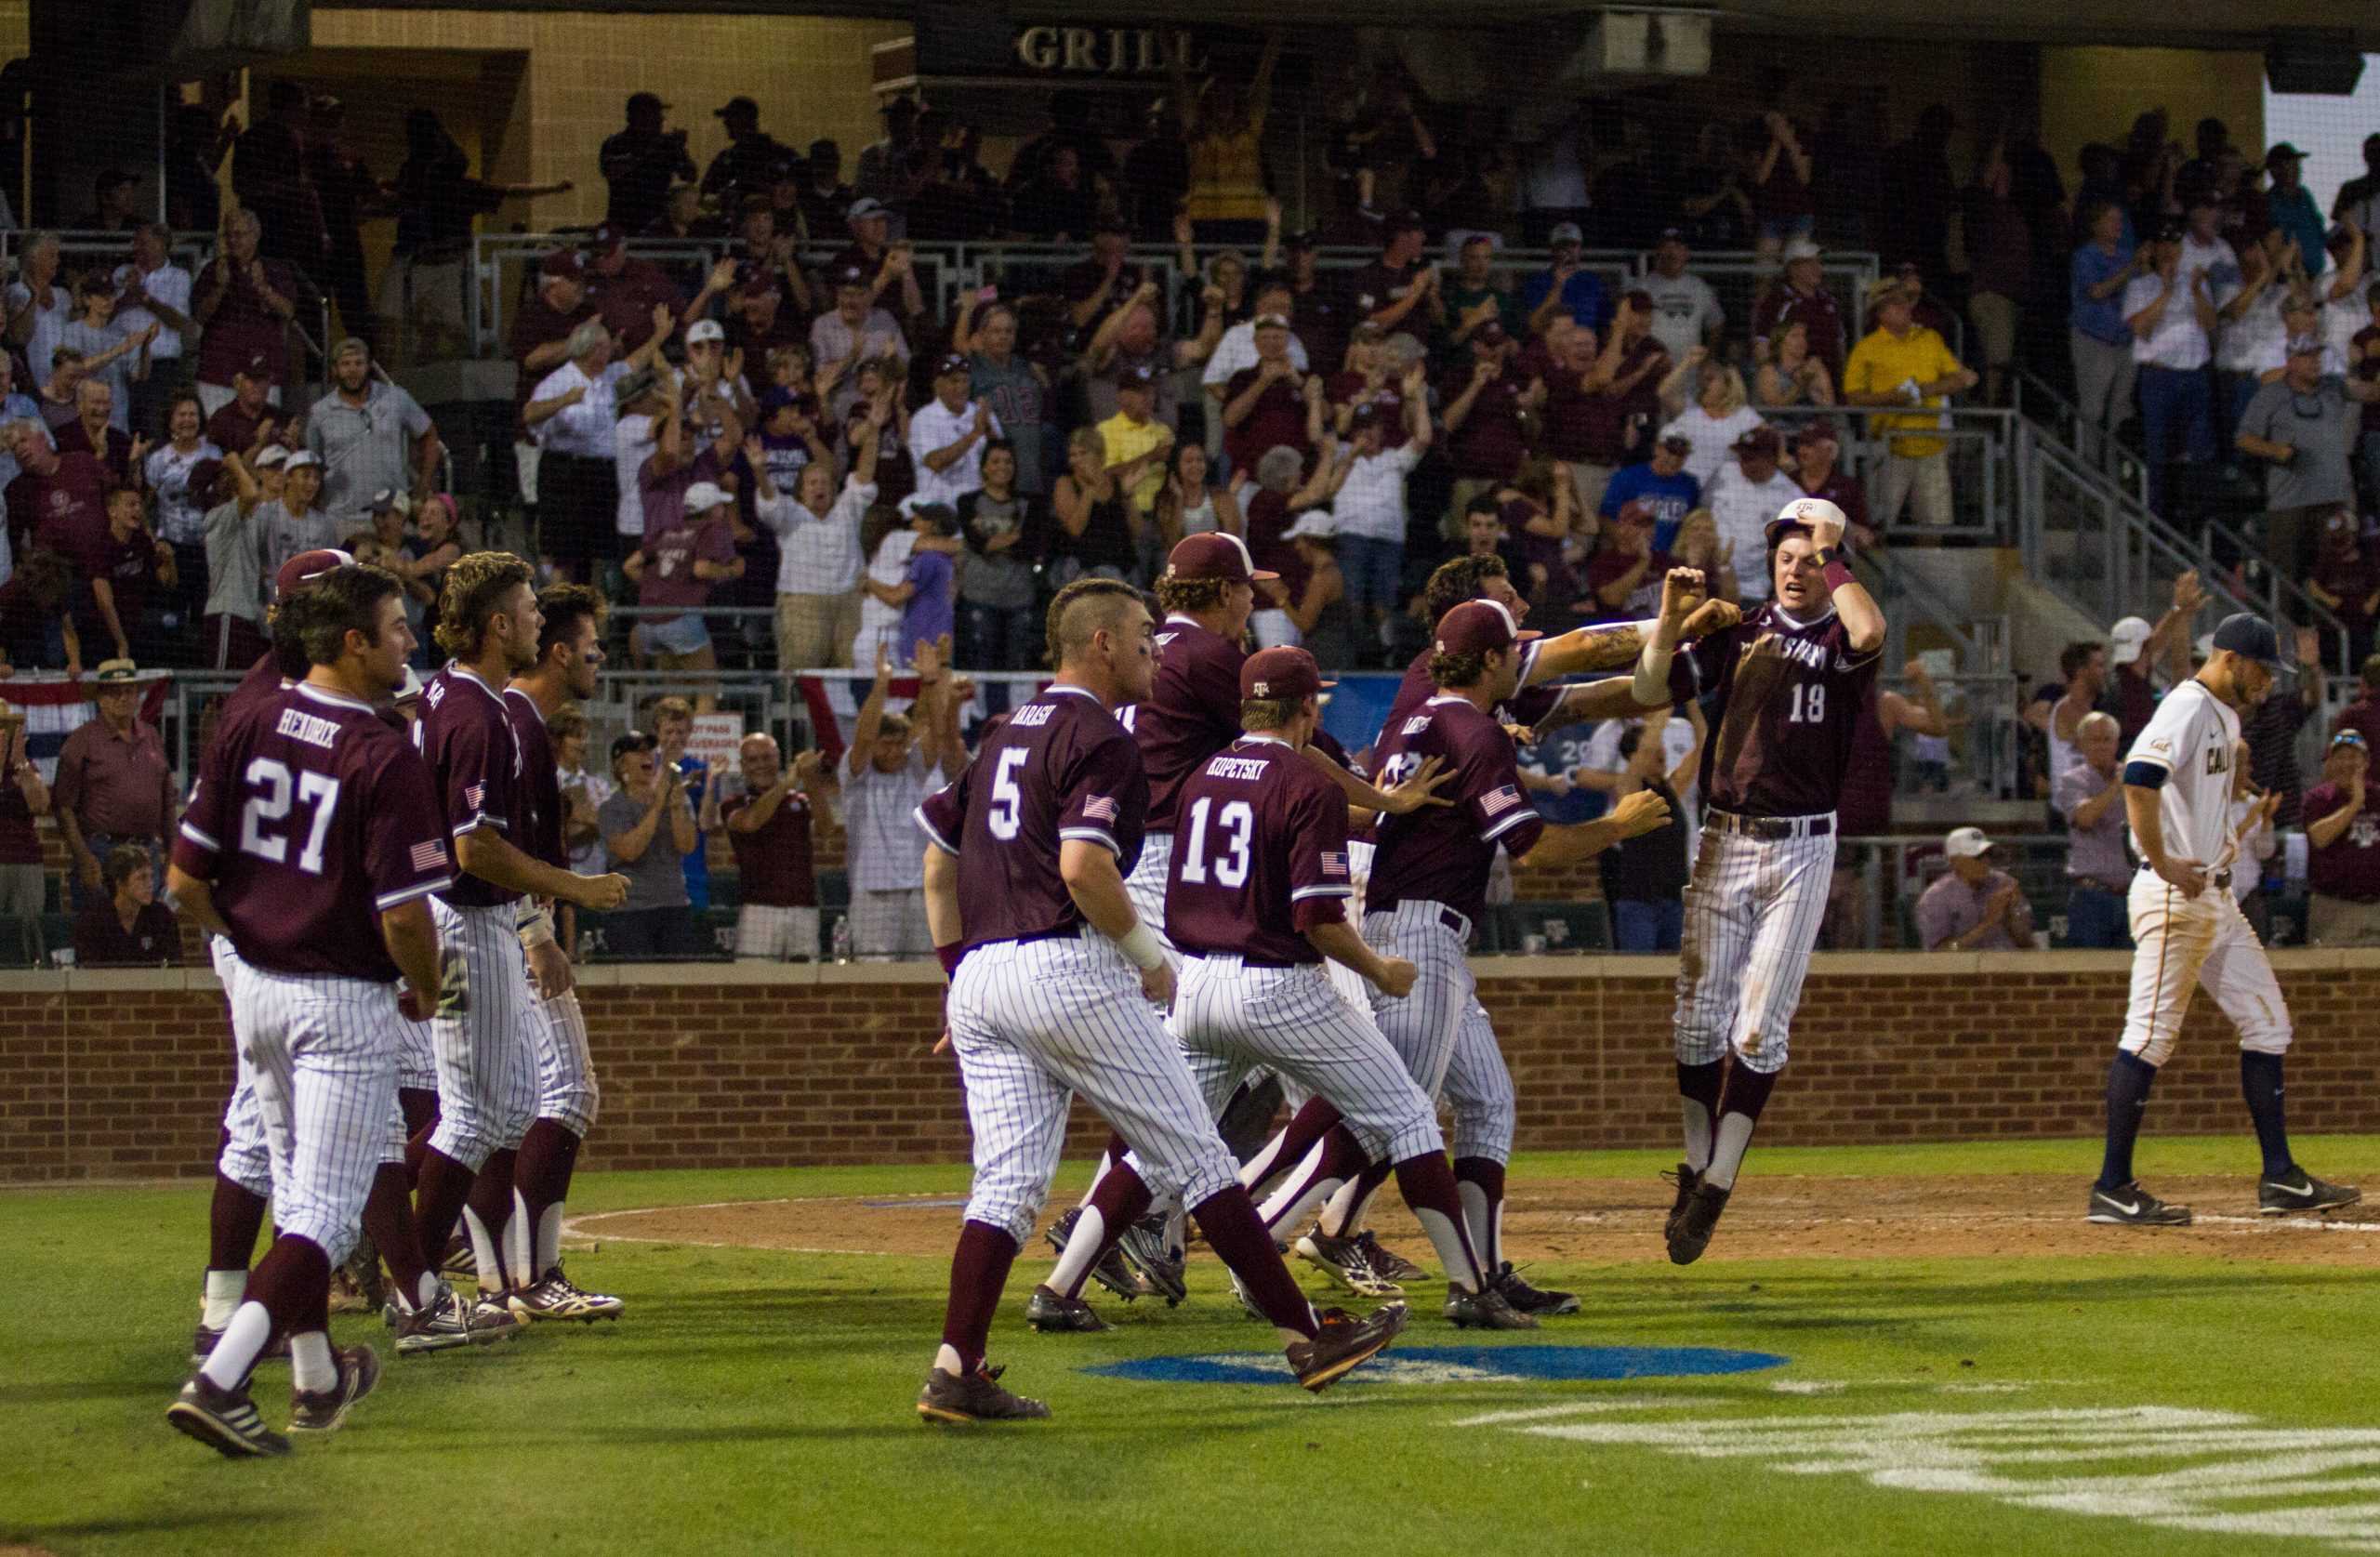 The+Aggies%26%238217%3B+path+to+a+Regional+game+seven